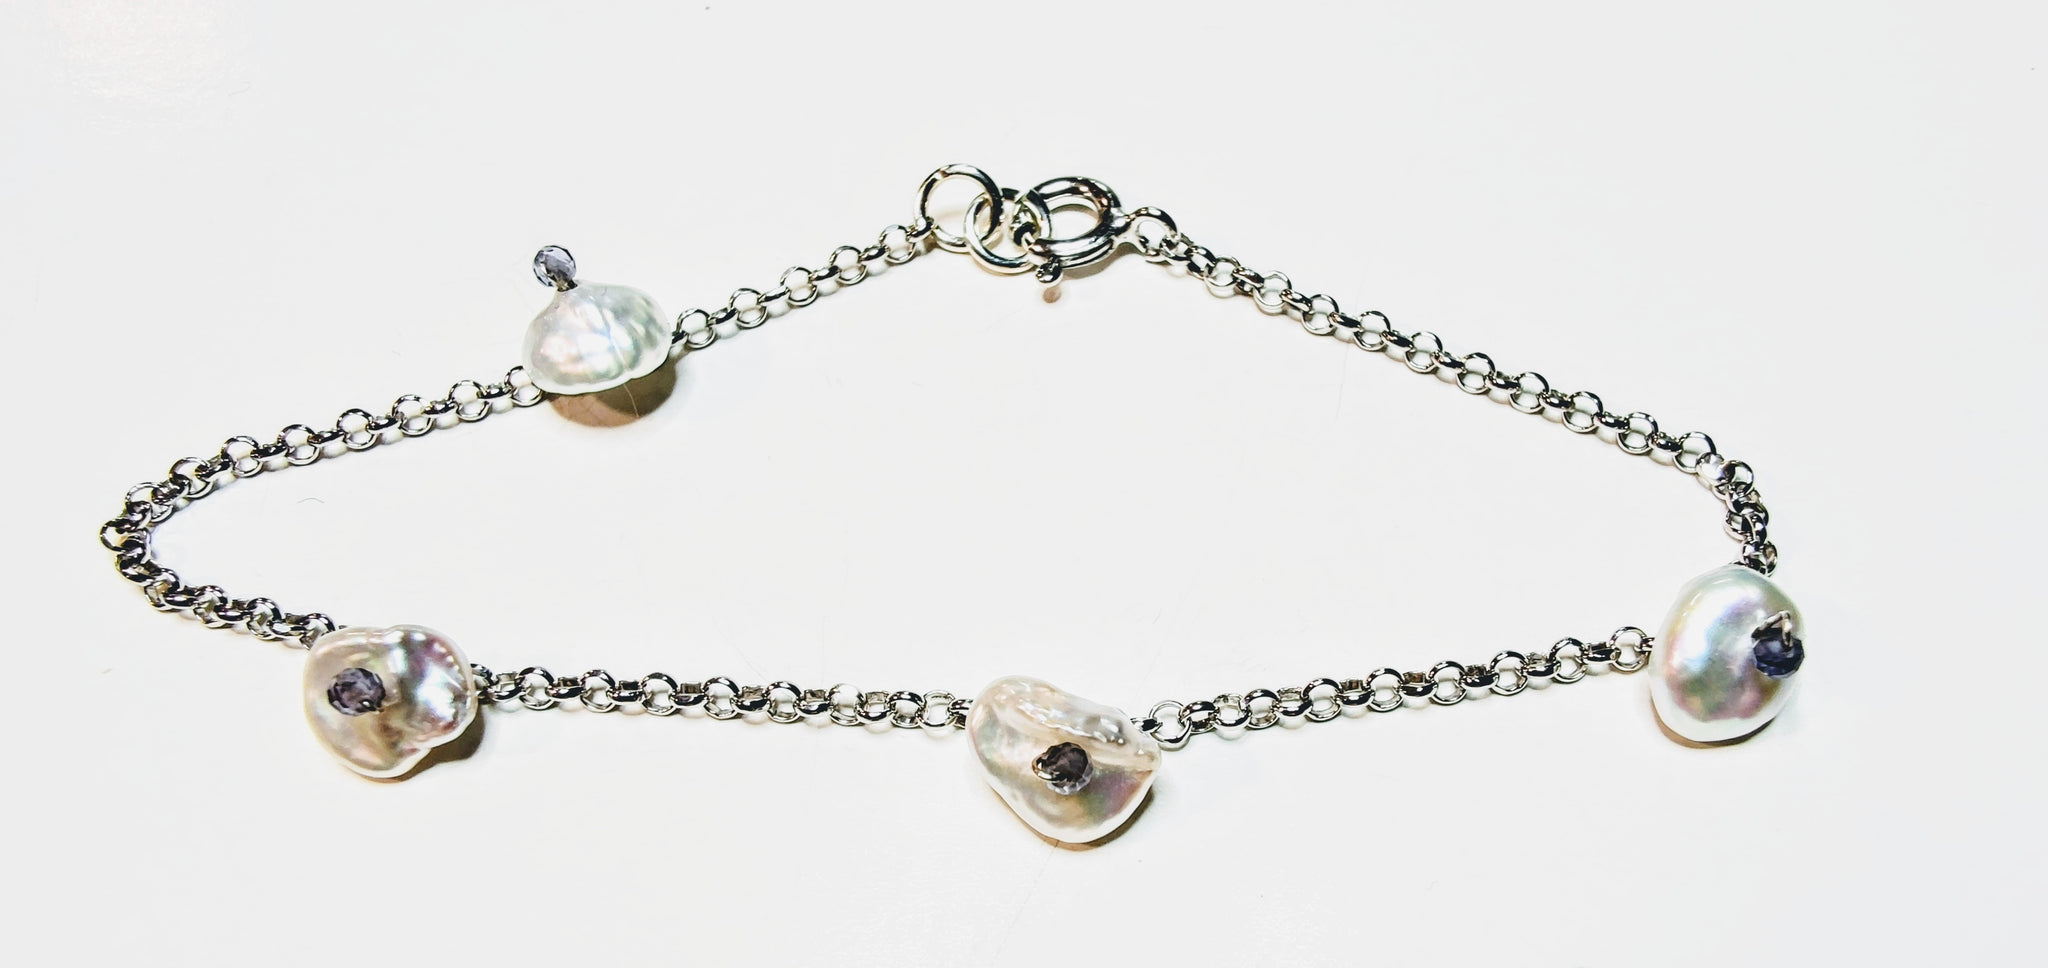 Silver bracelet with keshi pearls and blue spinel